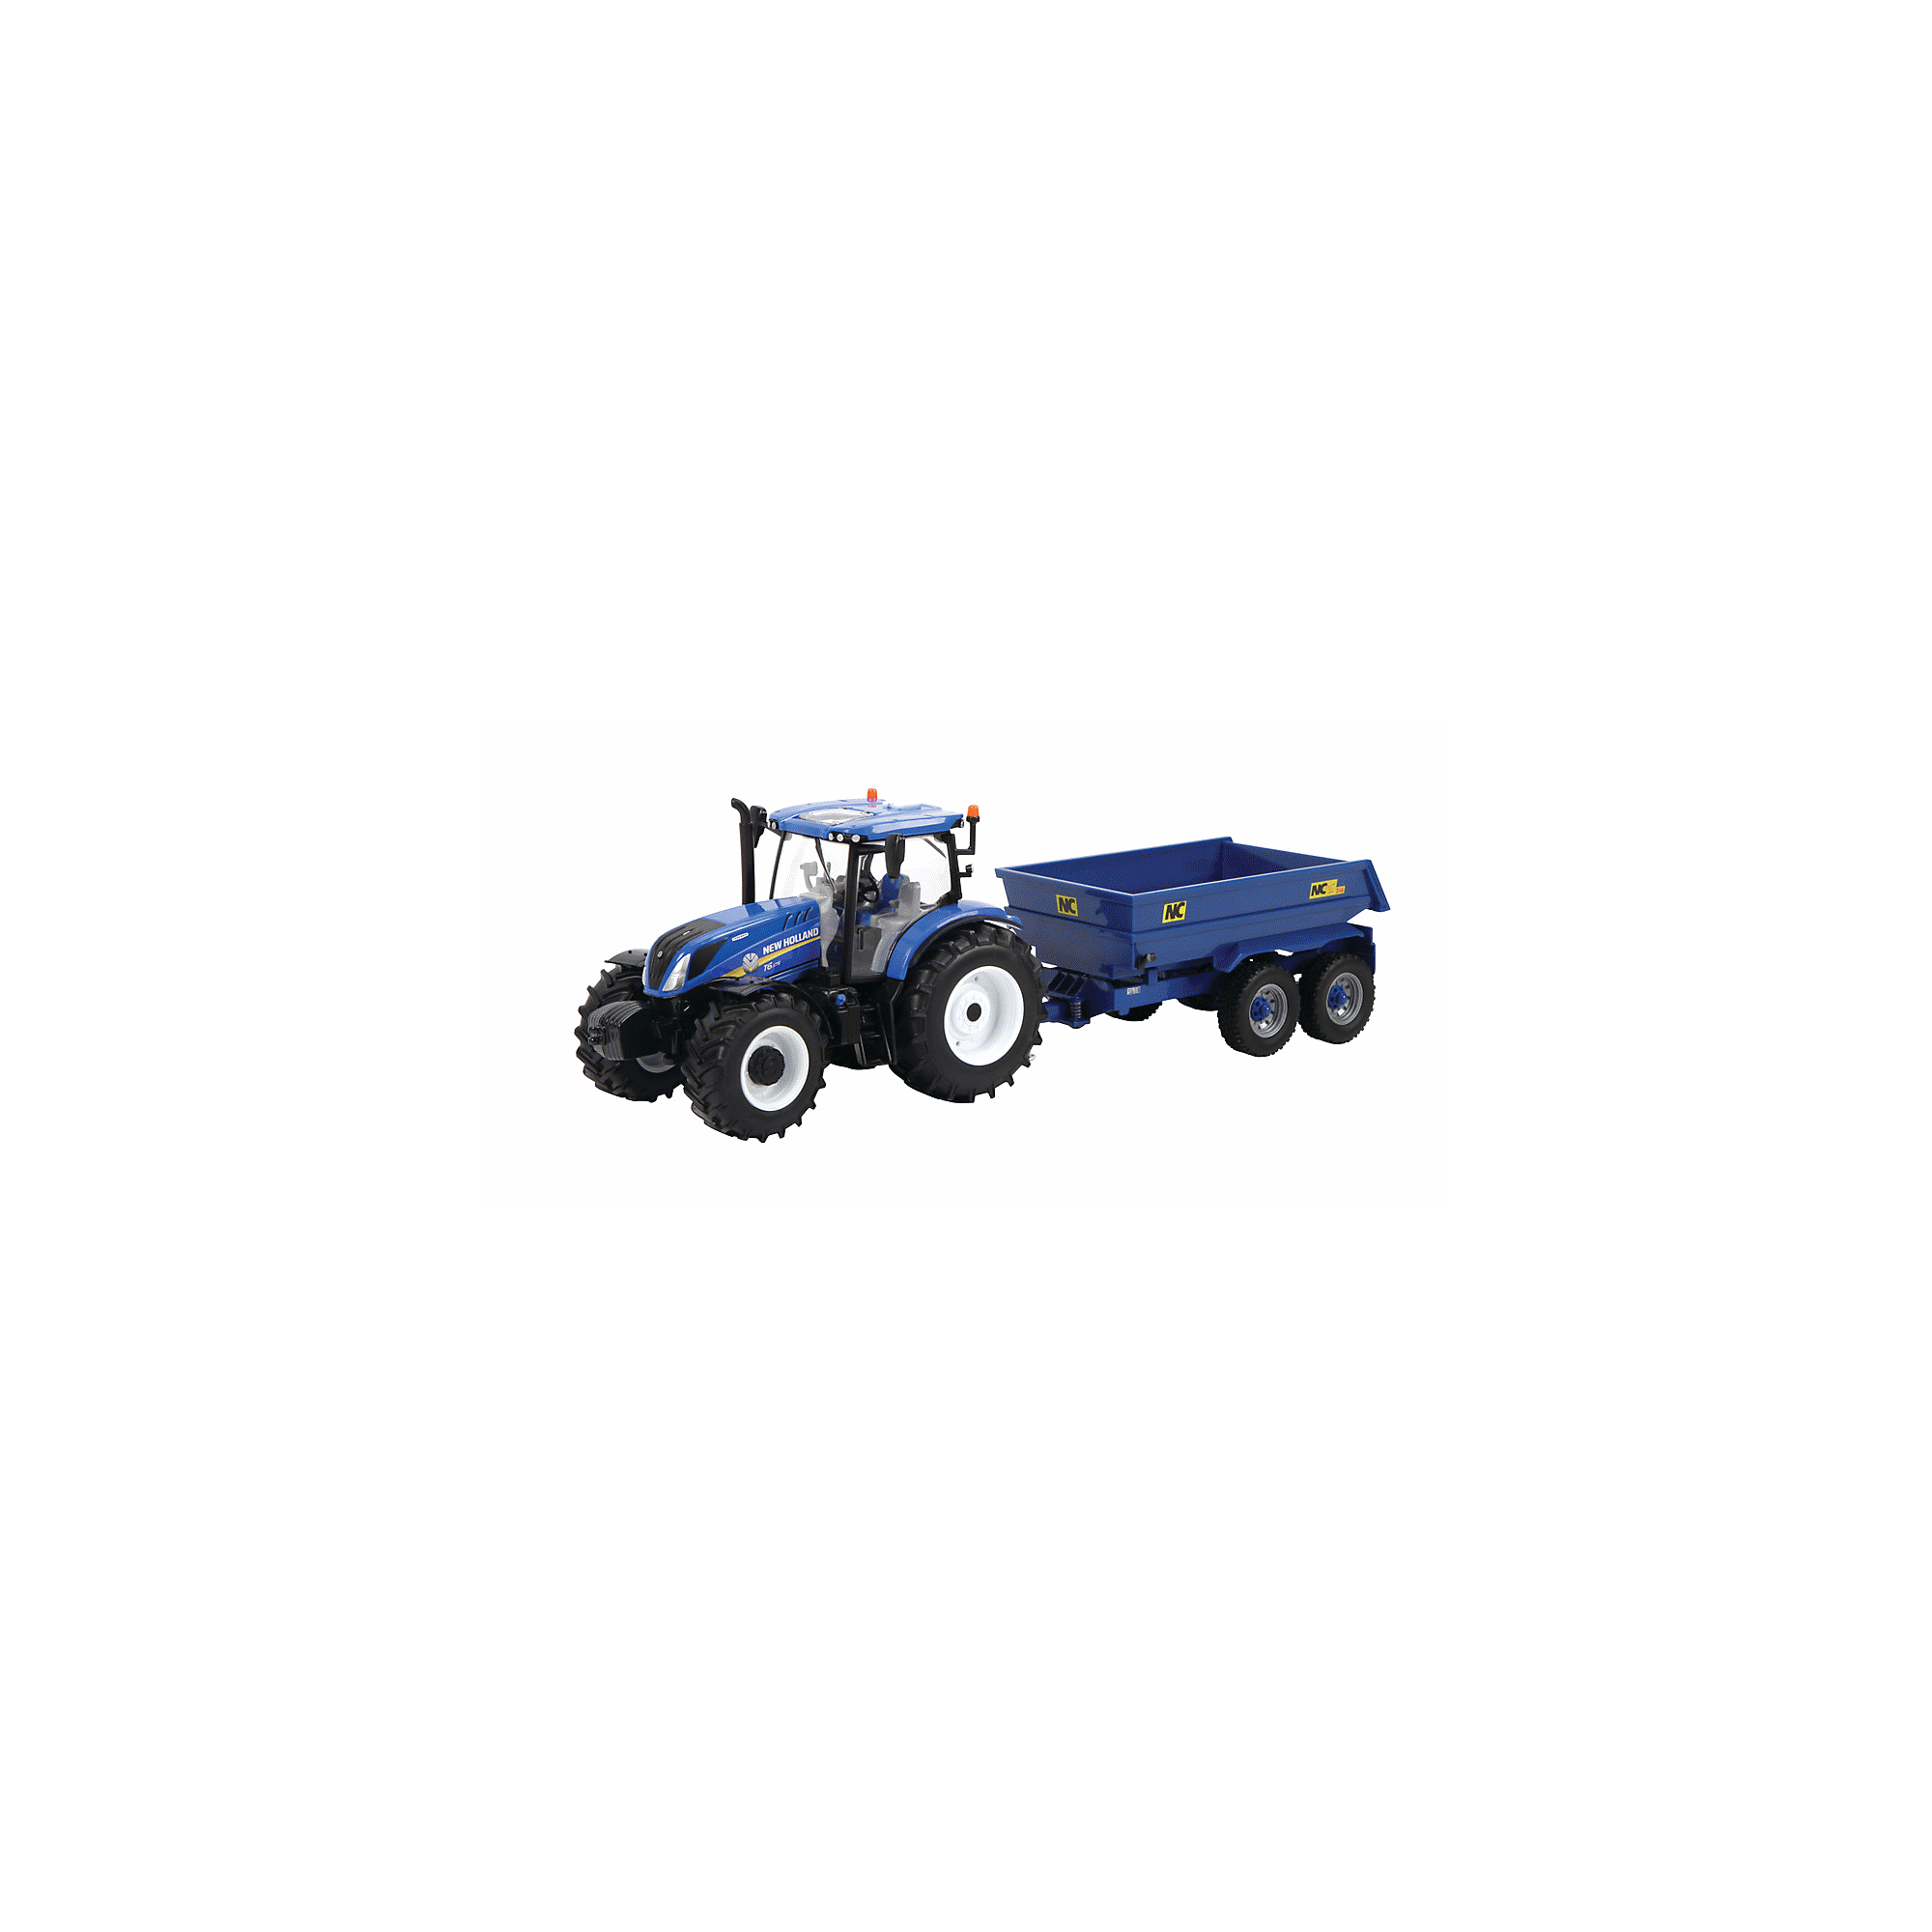 Britains New Holland T6 Tractor with Trailer